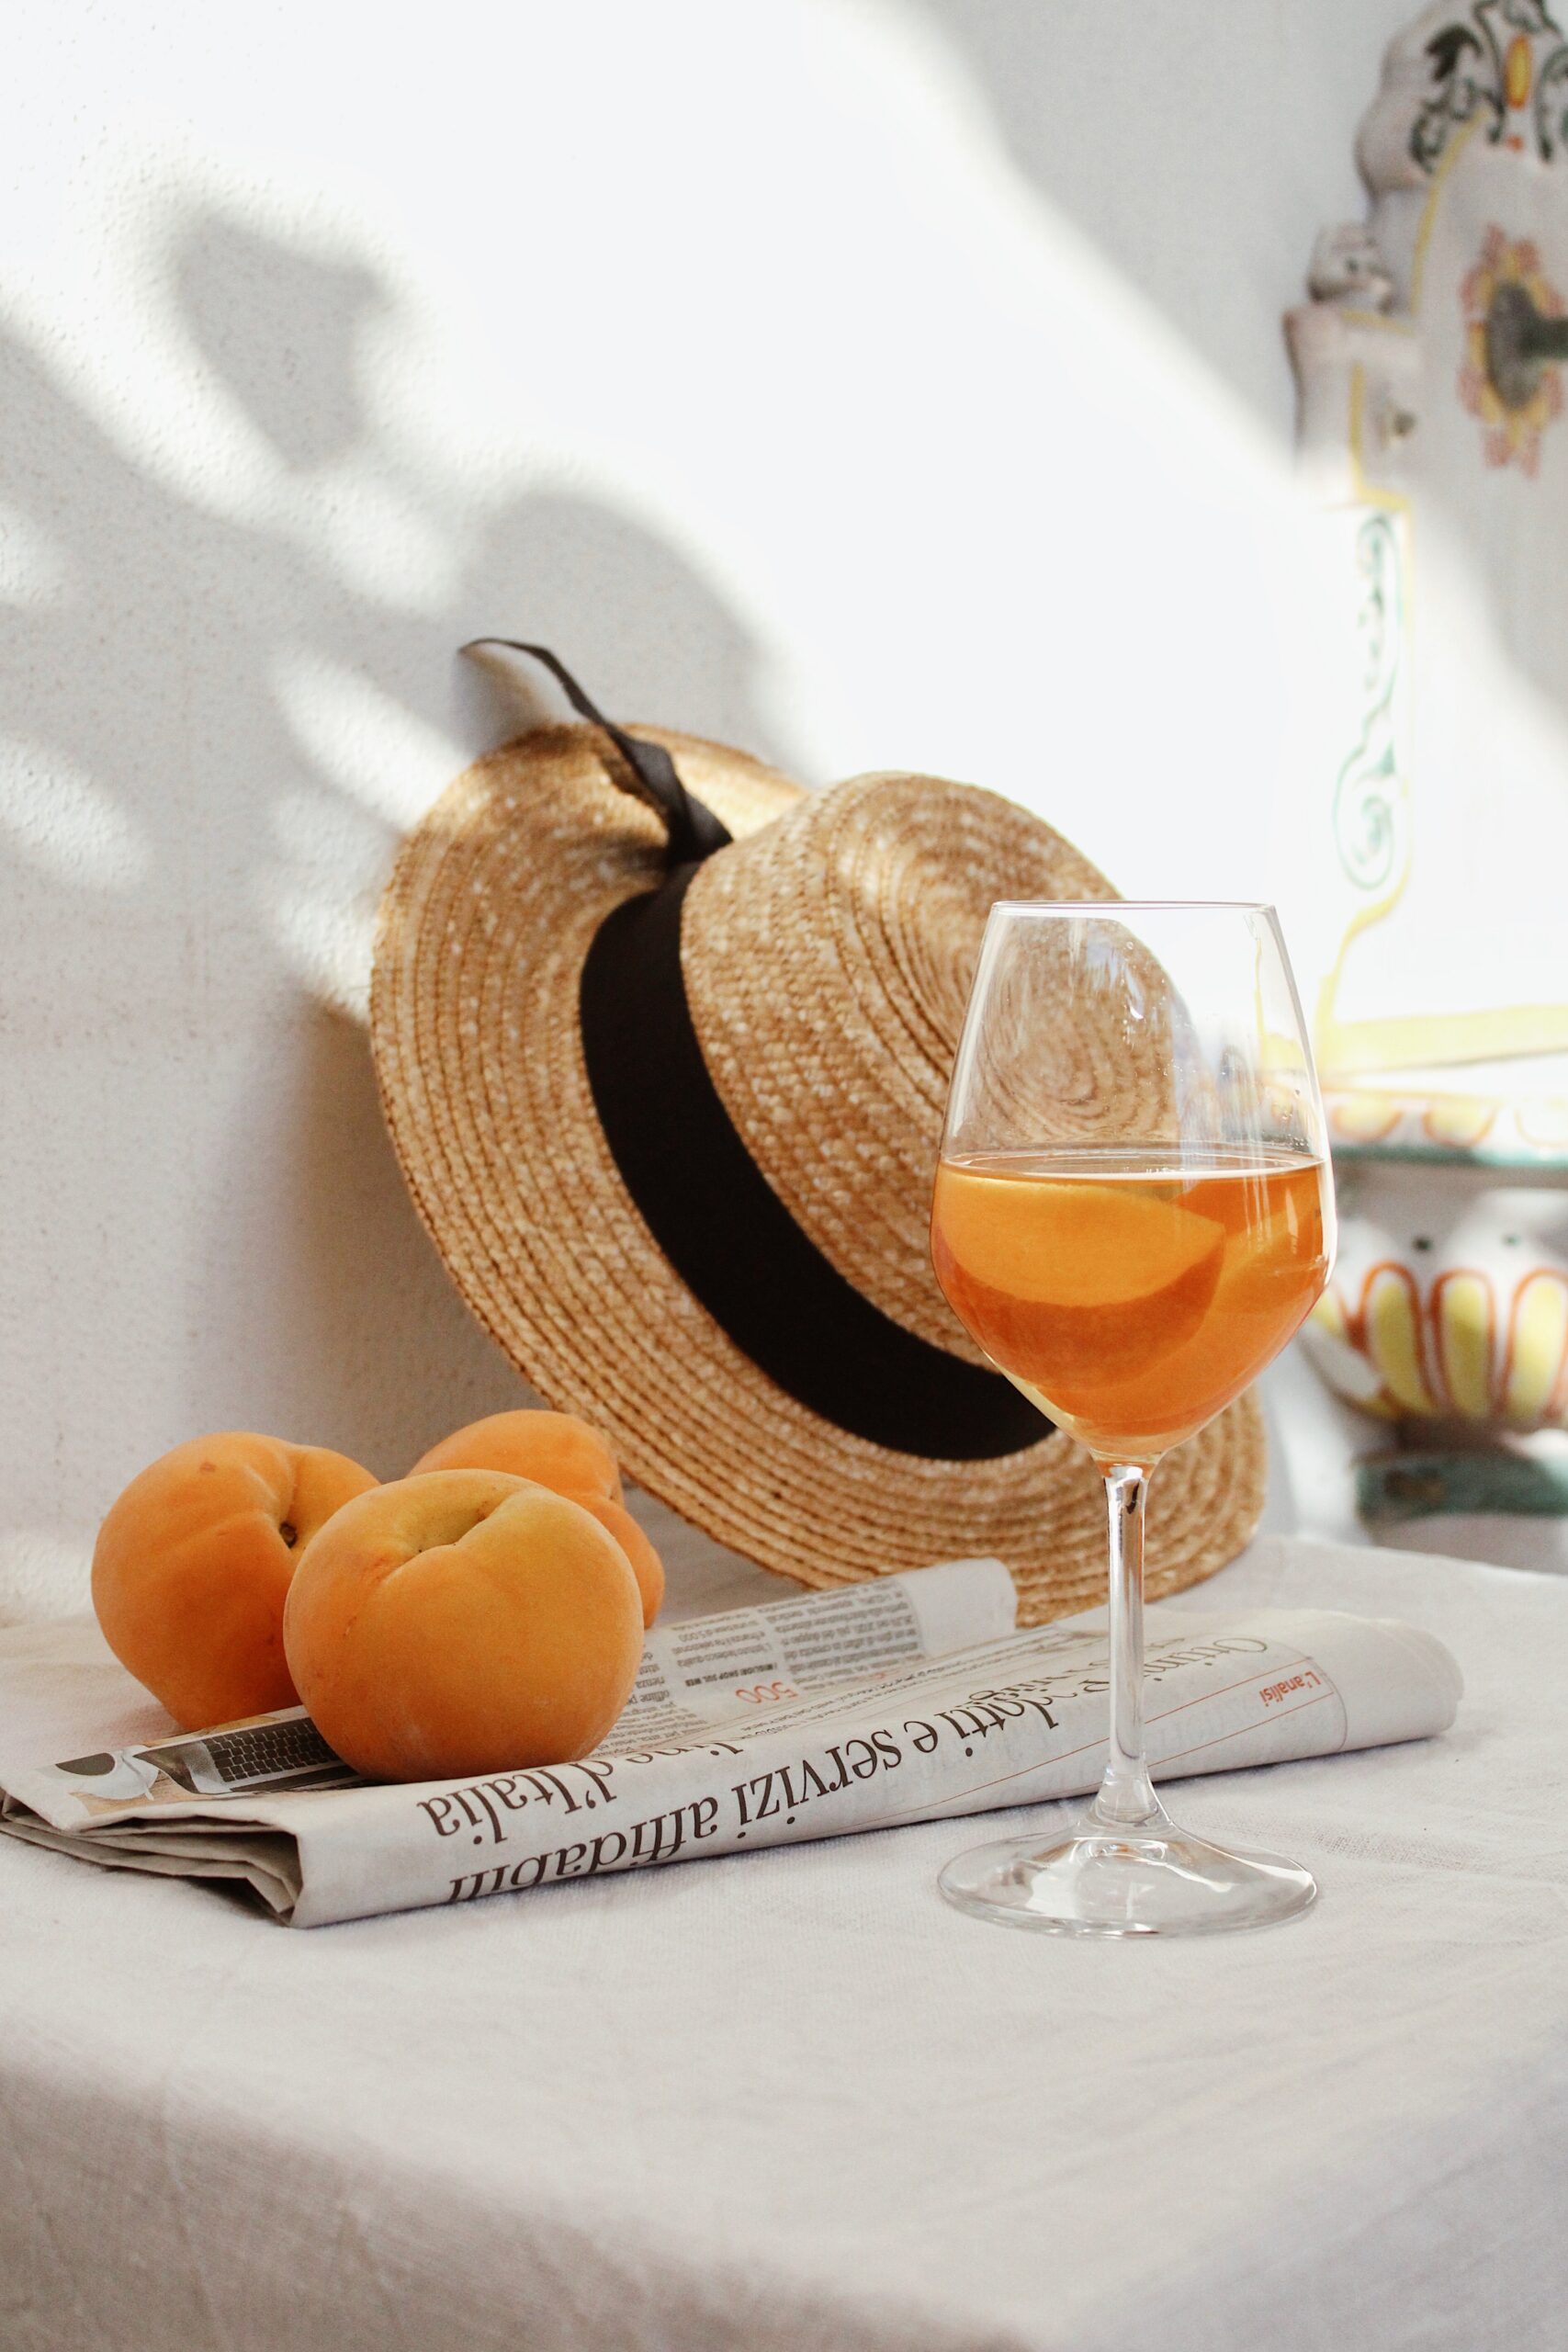 Apricots on newspaper with hat and refreshing spring drink in wine glass